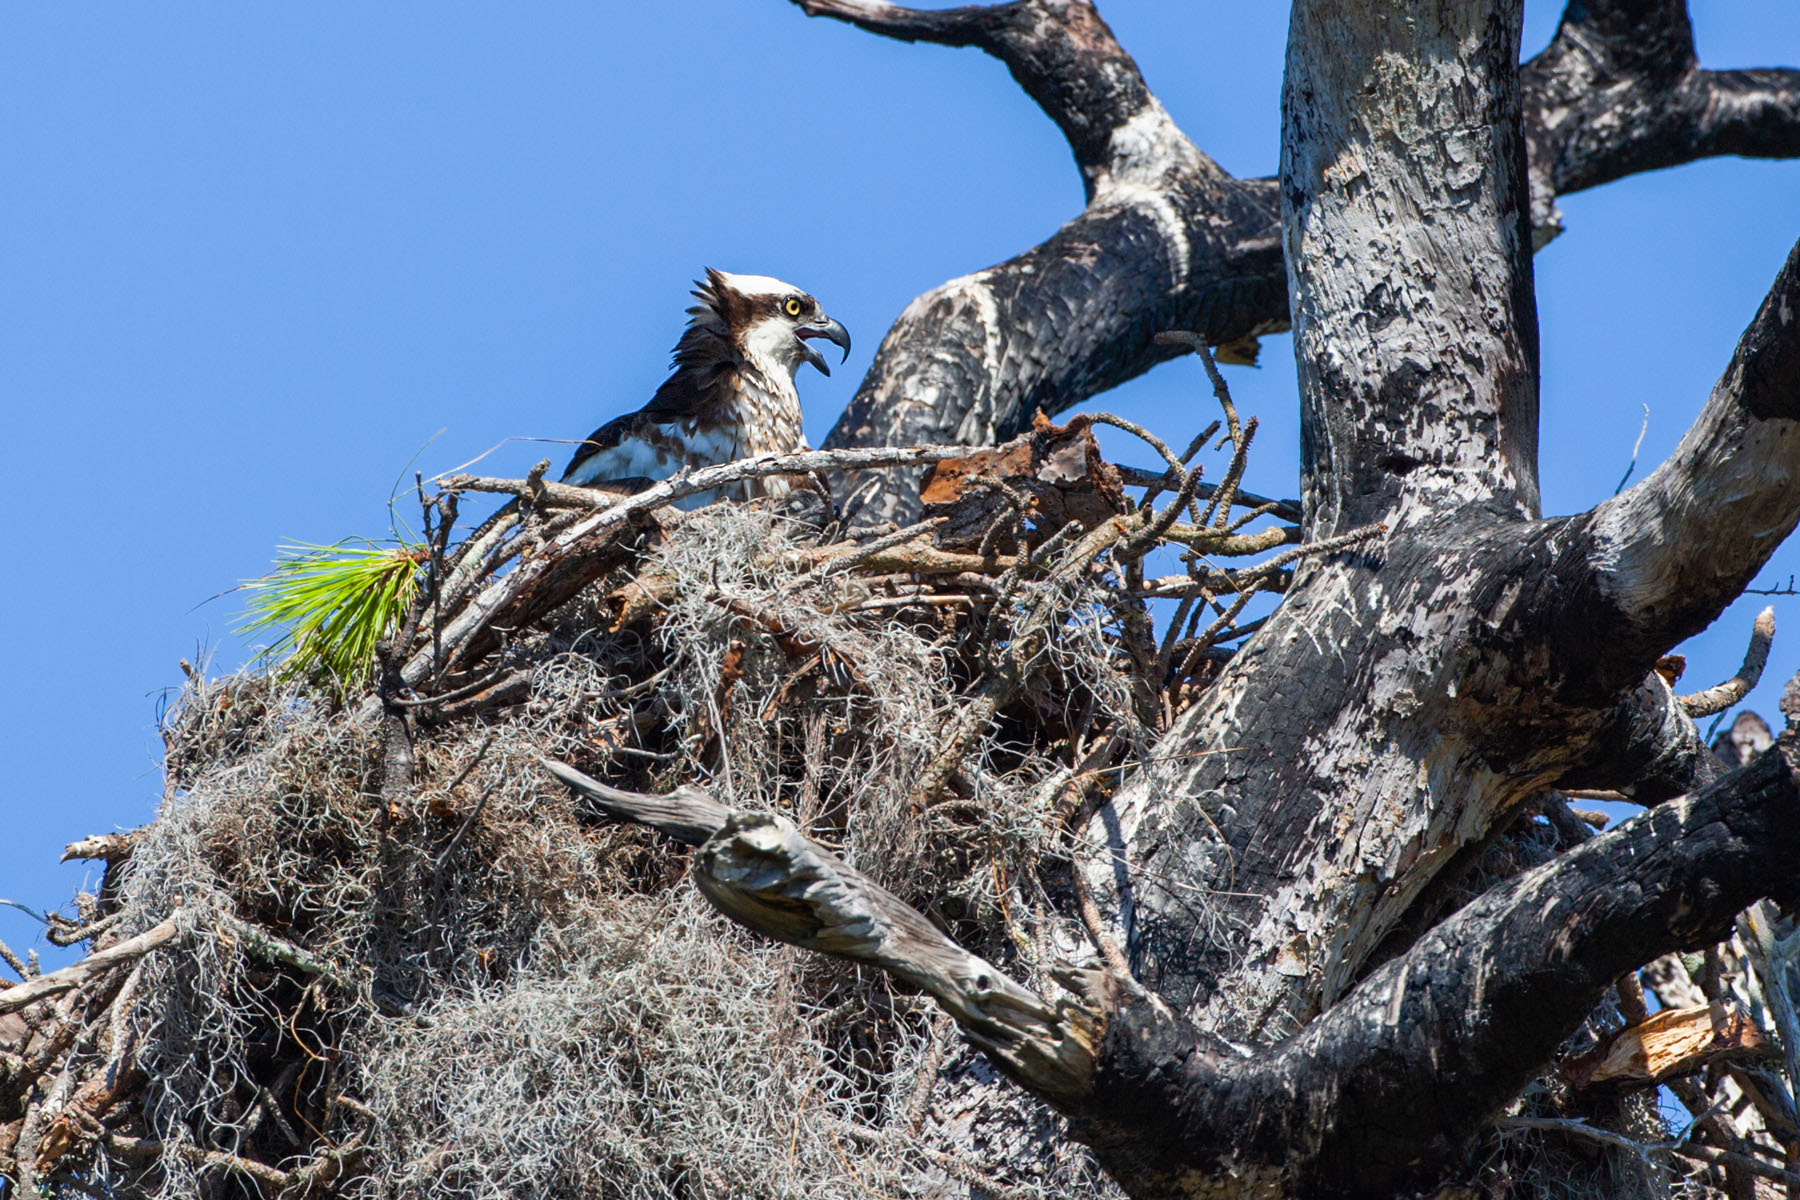 Osprey chick in nest, Honeymoon Island State Park, Florida.  Click for next photo.